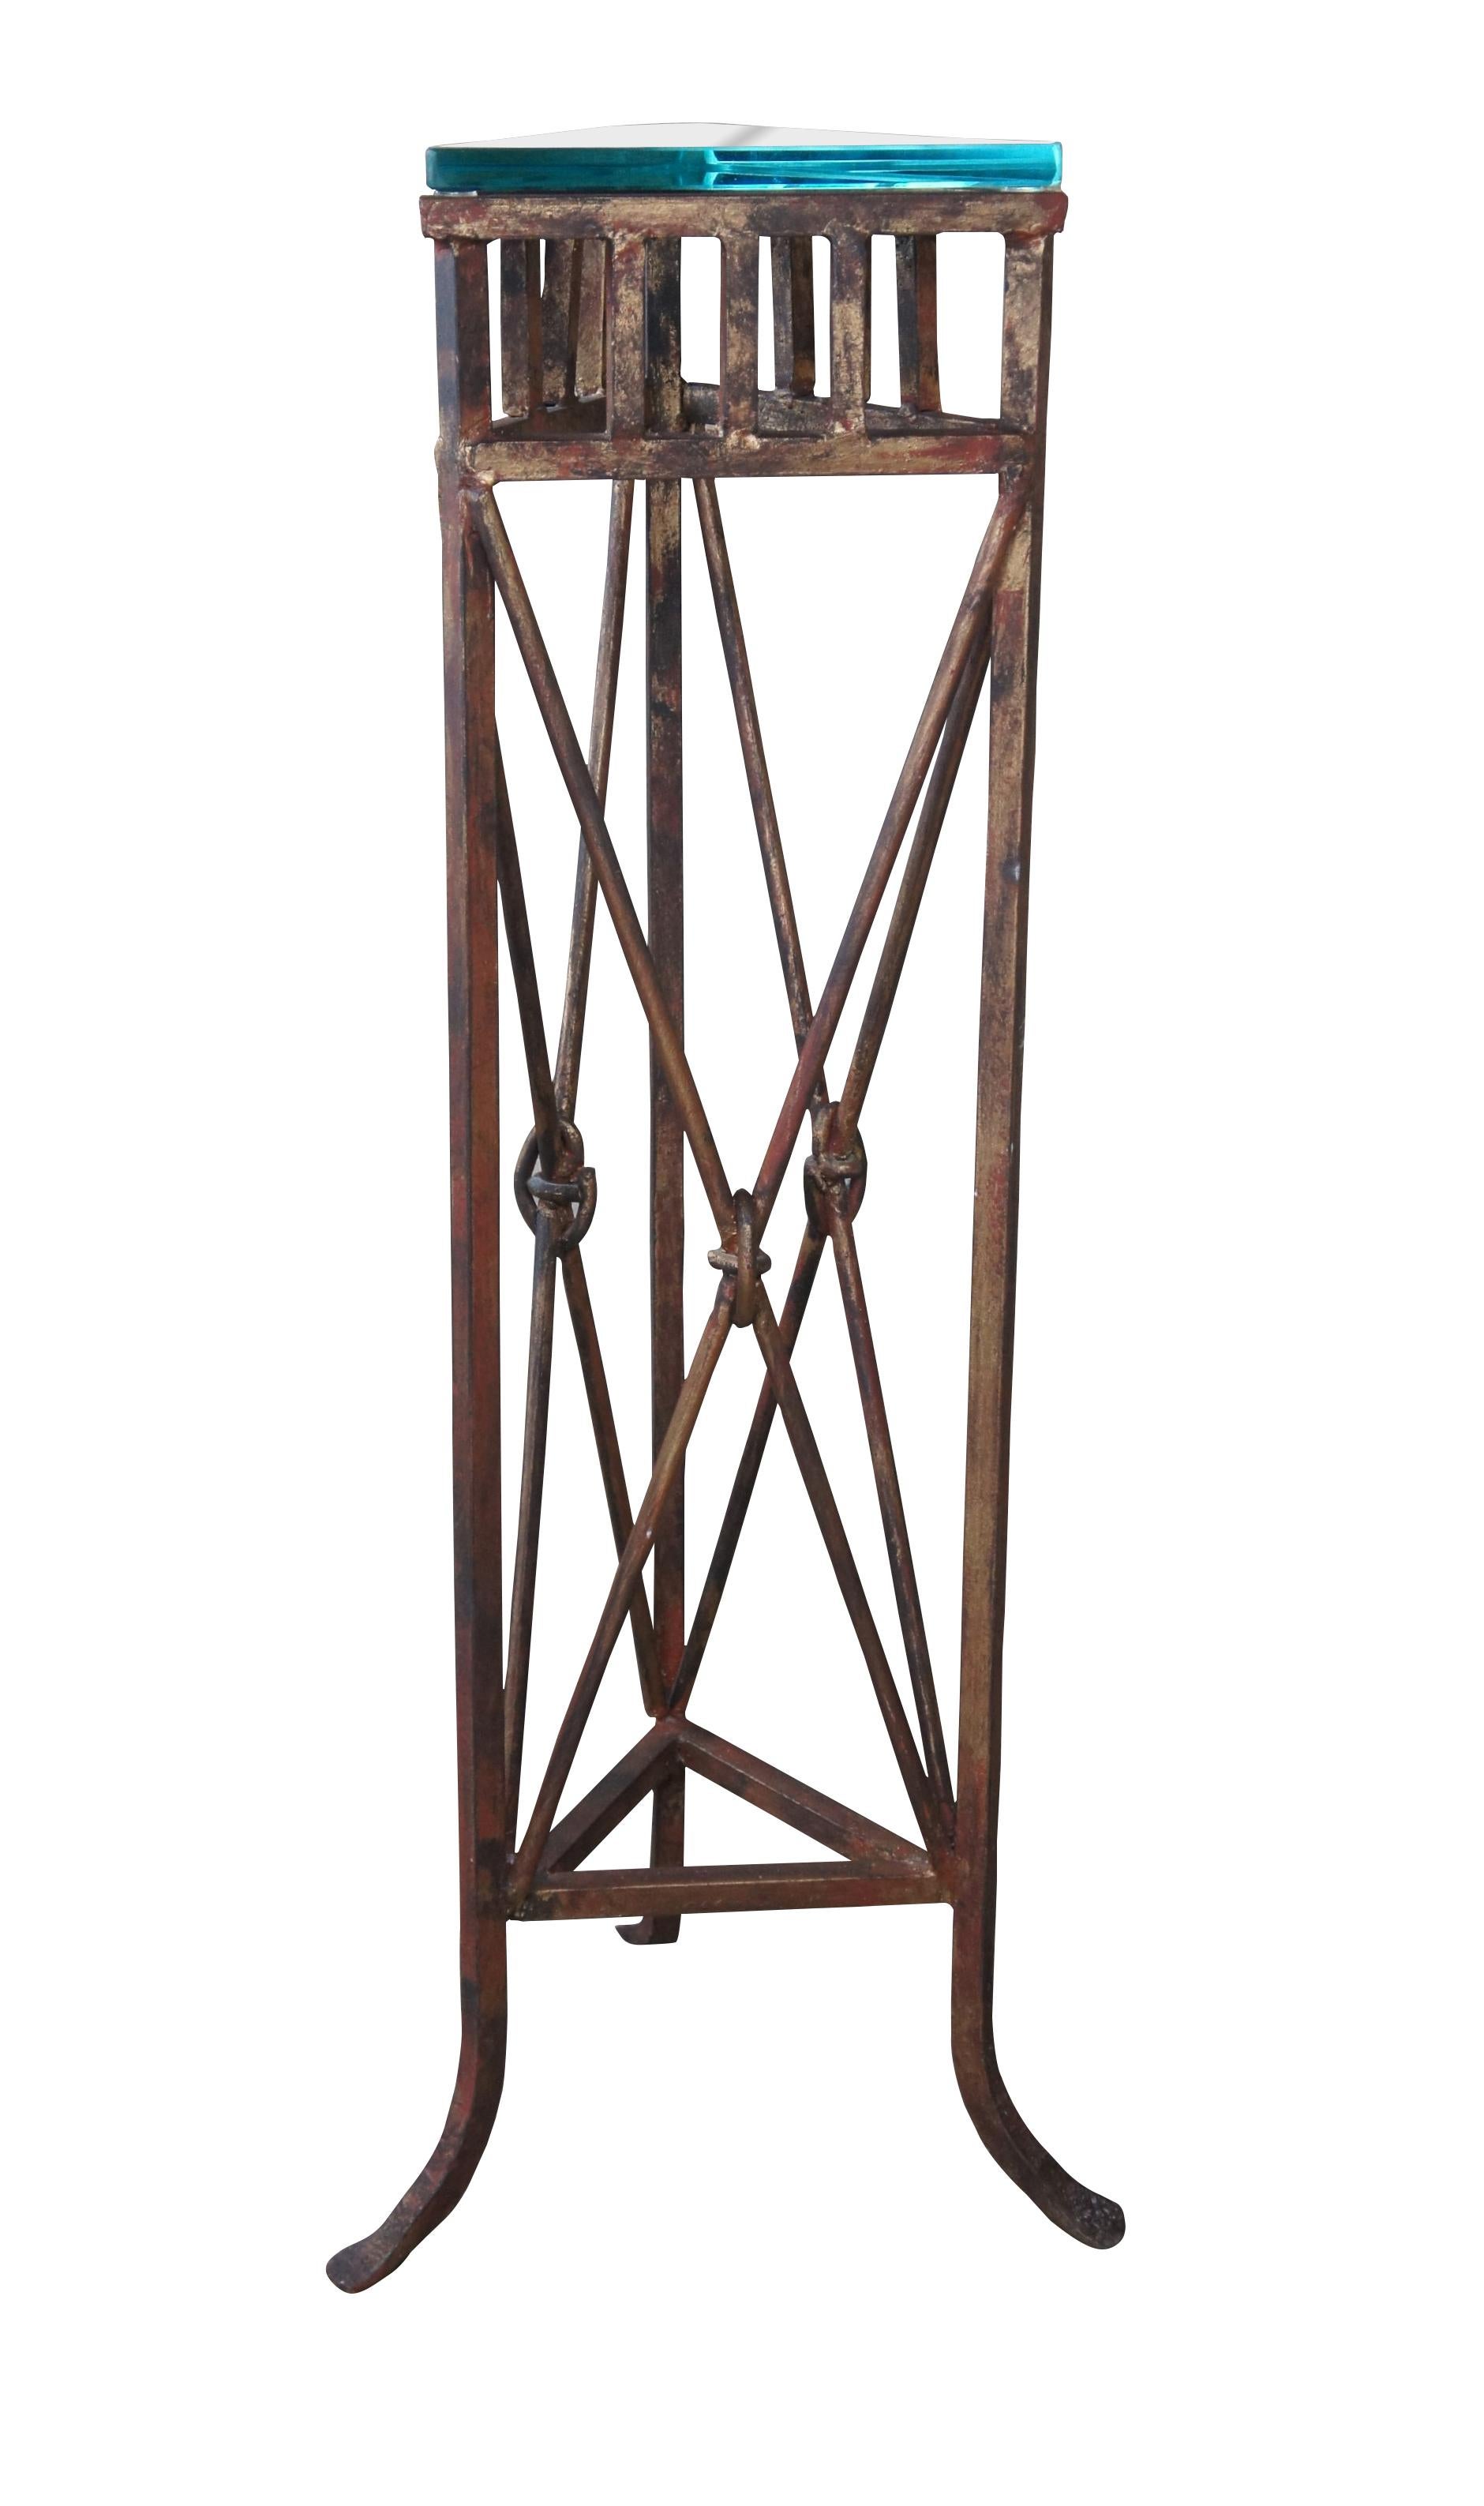 An iron pedestal in Neoclassical and French Empire styling. Features a reddish gold triangular prism form with 